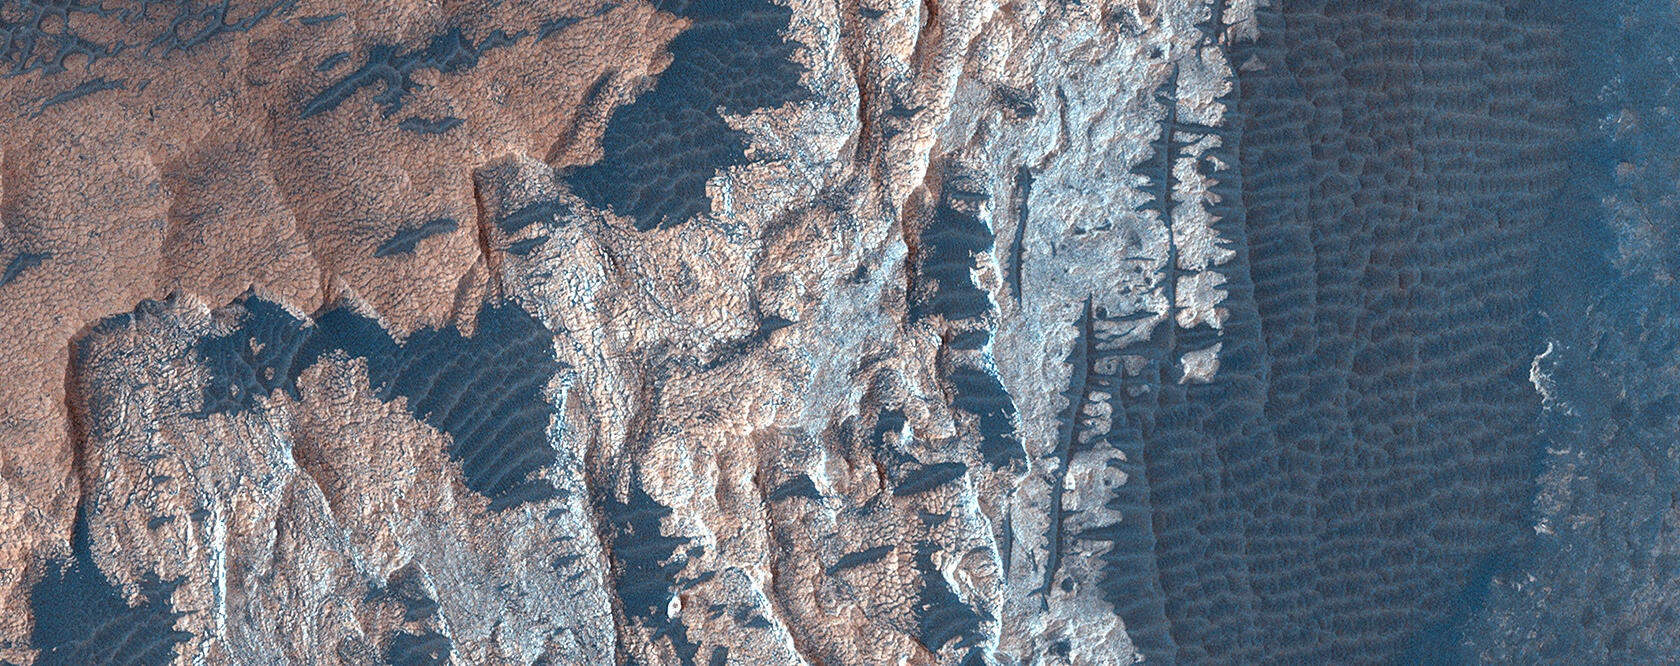 Mars from orbit. Pinkish rocky terrain with ripped textured grey sand filling in gaps.